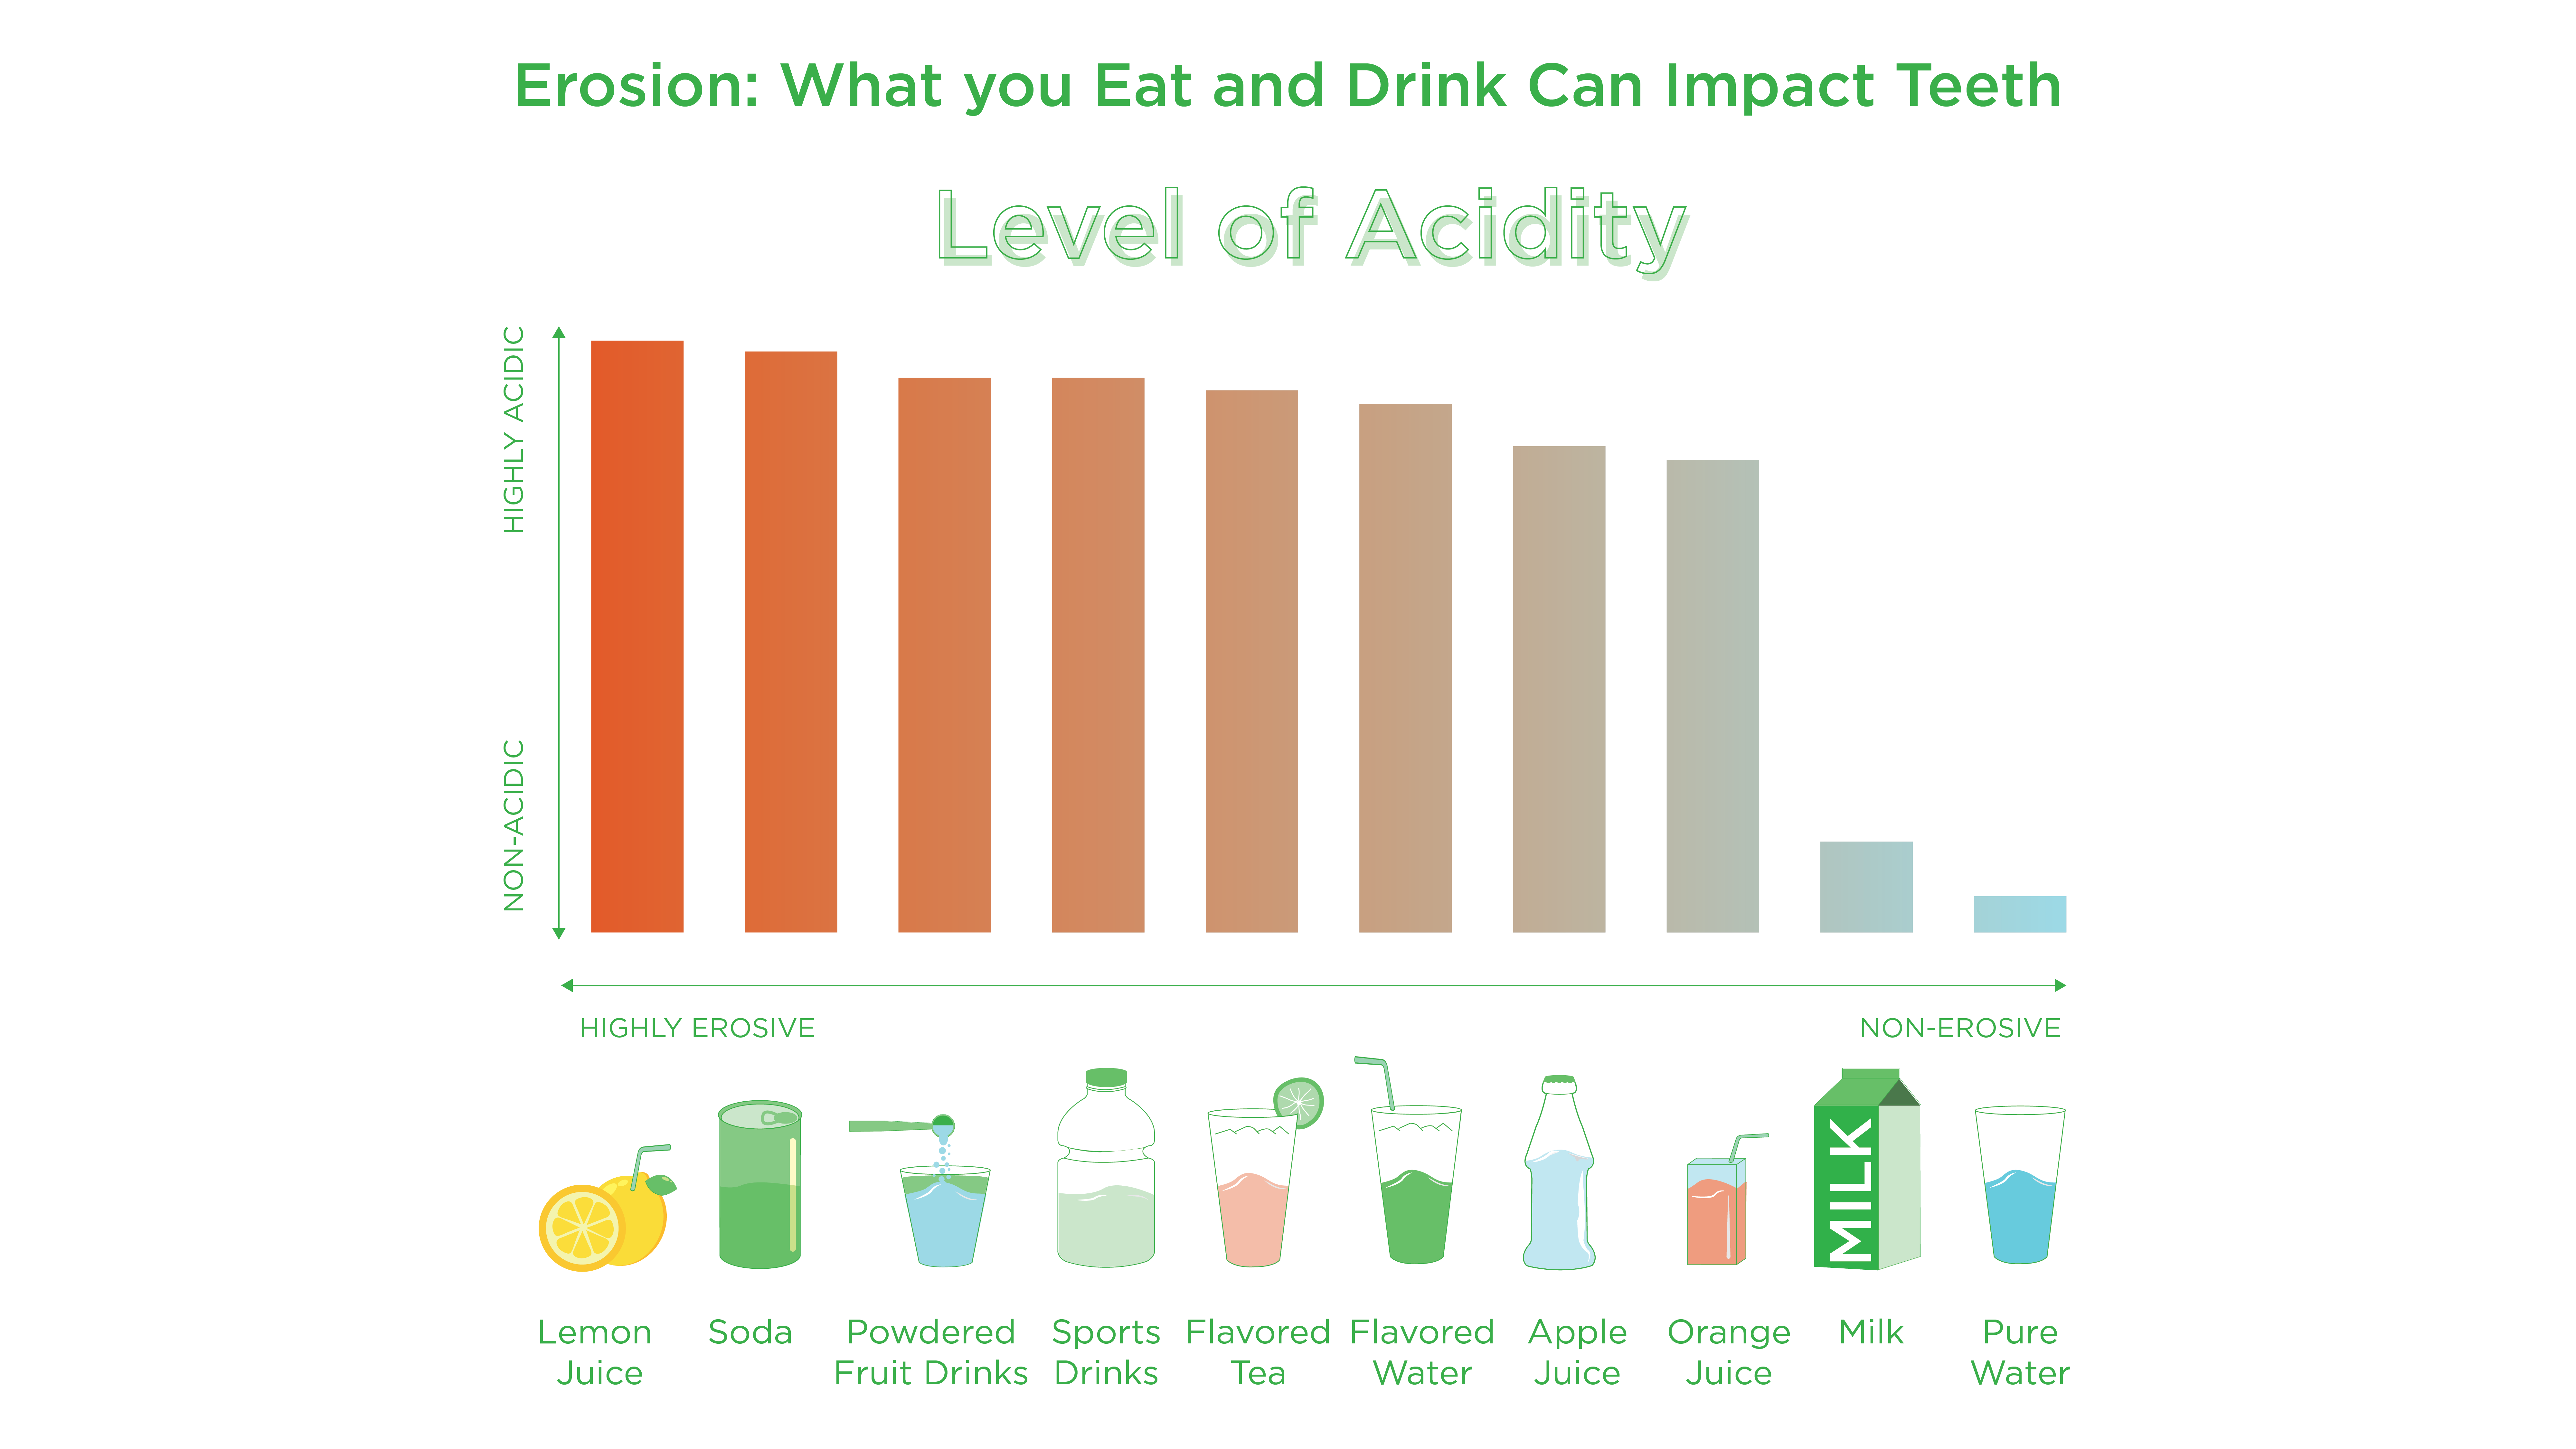 Graph showing levels of acidity in beverages